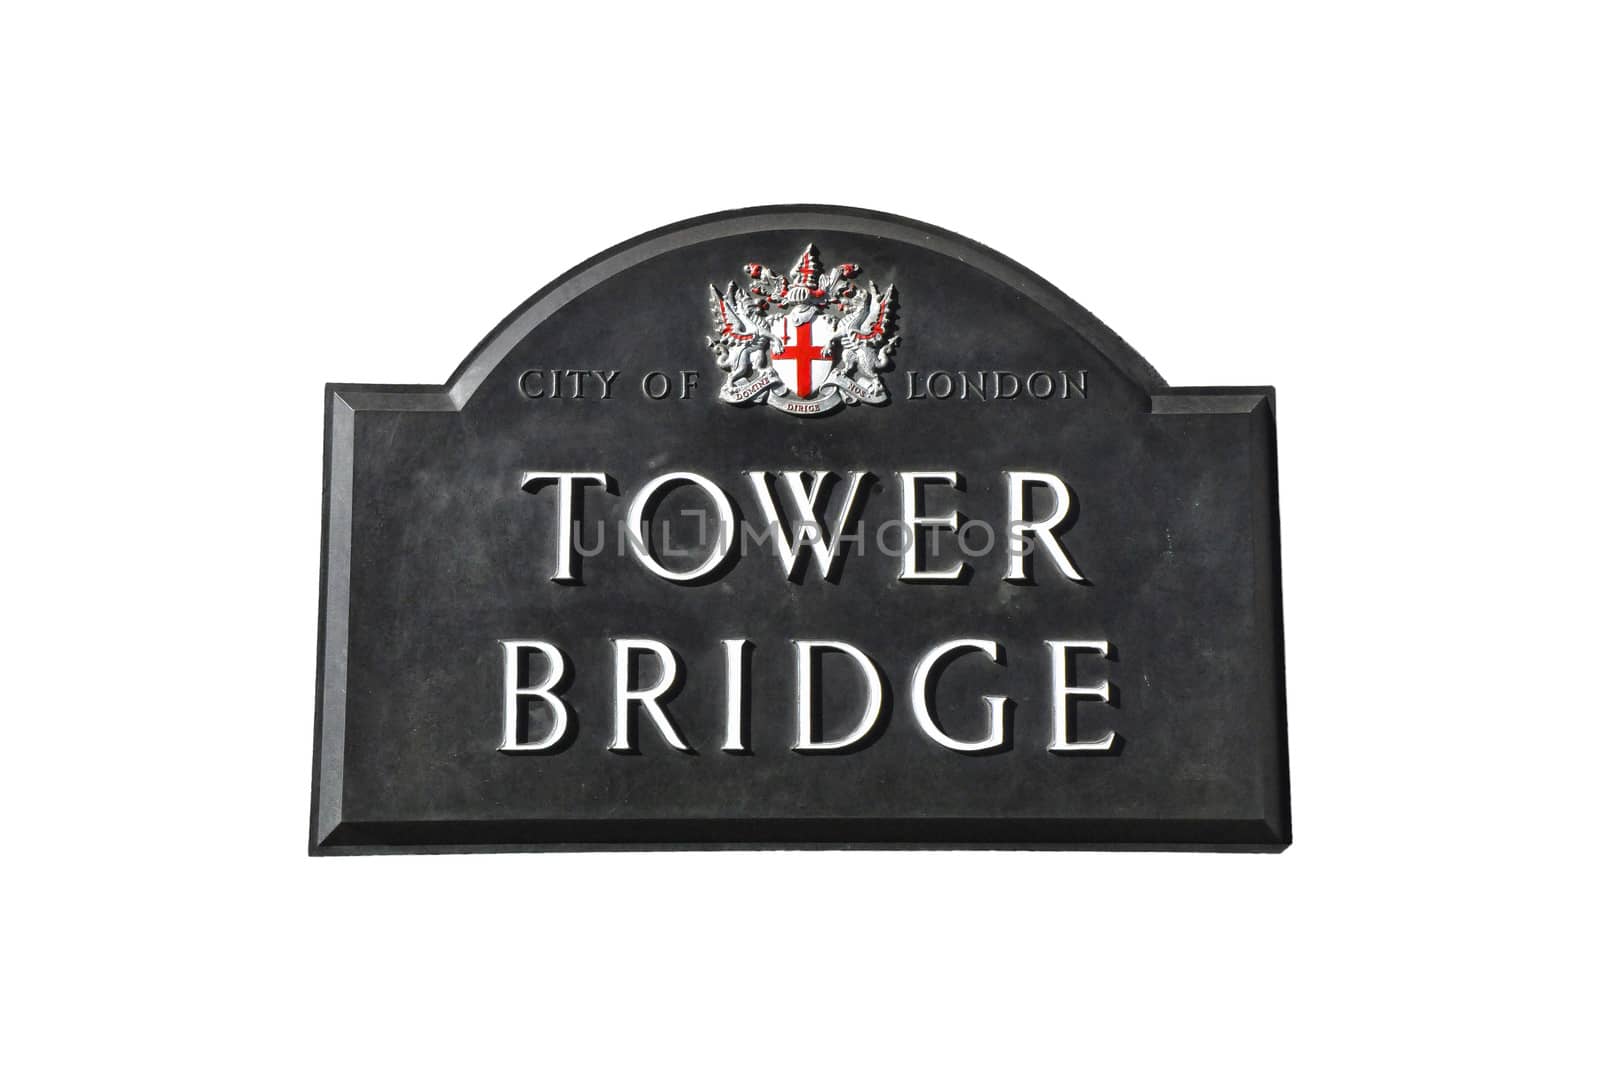 Tower Bridge sign in London against white background